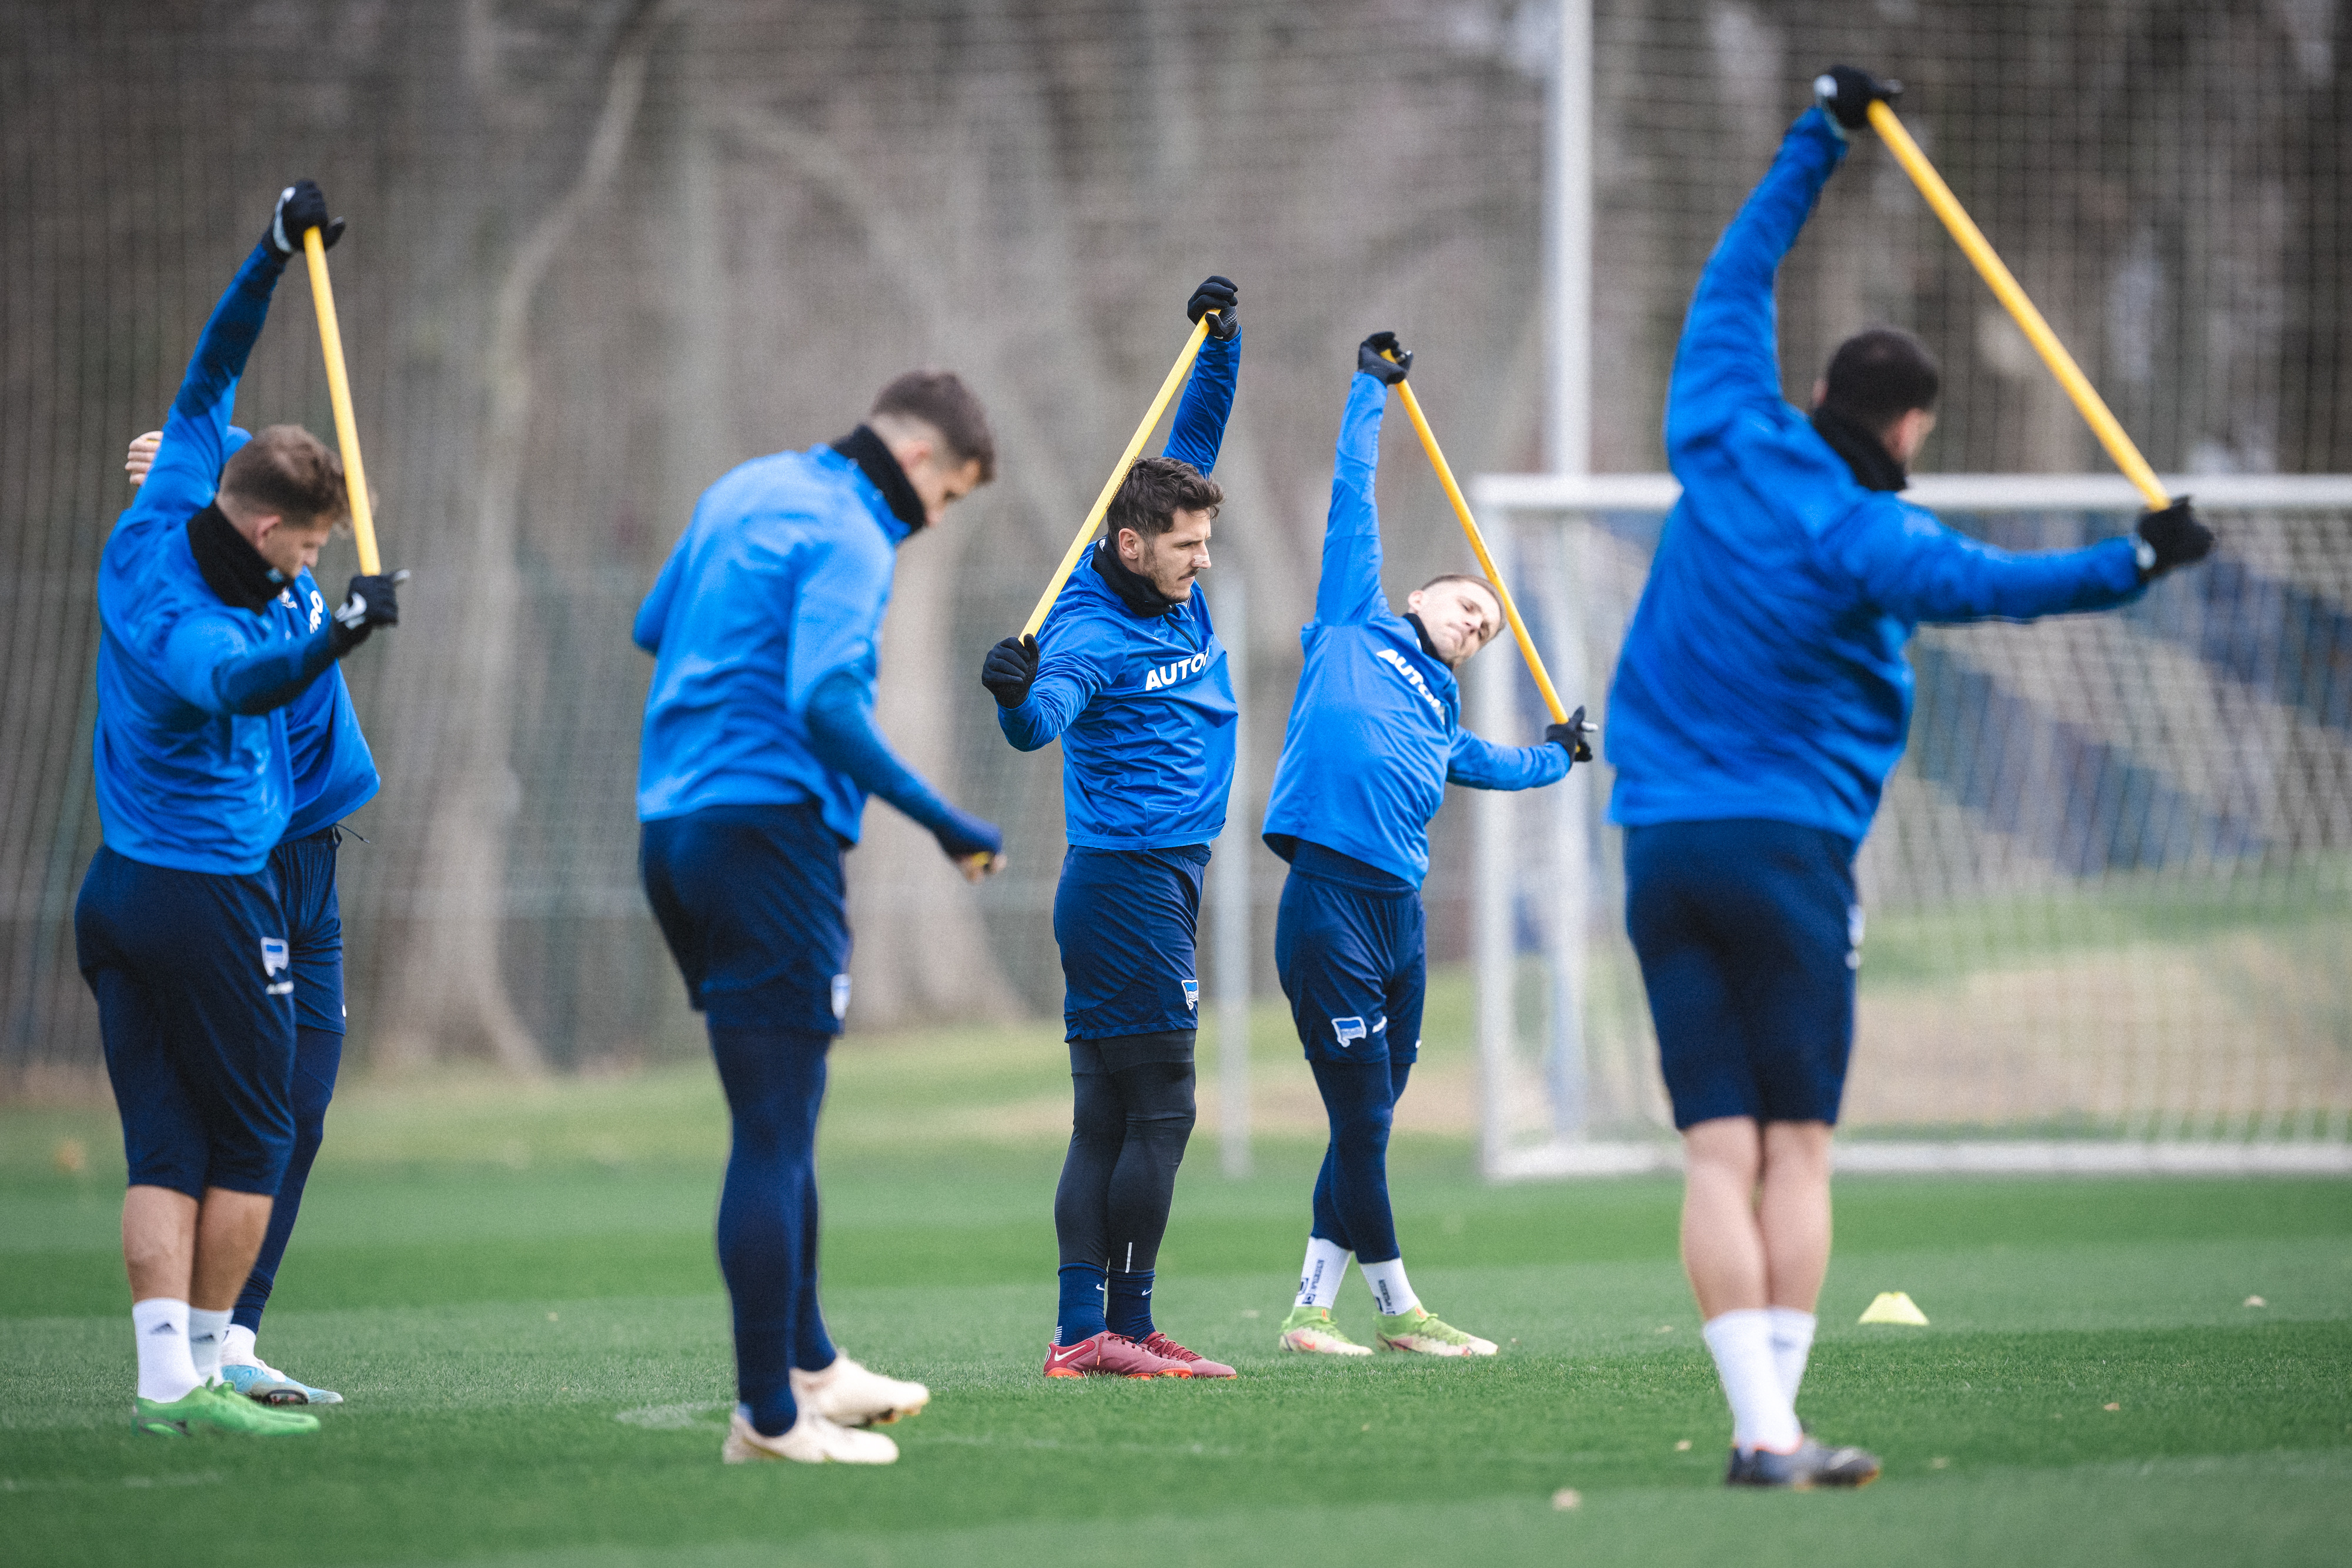 Stevan Jovetić and his team warming up with yellow poles.